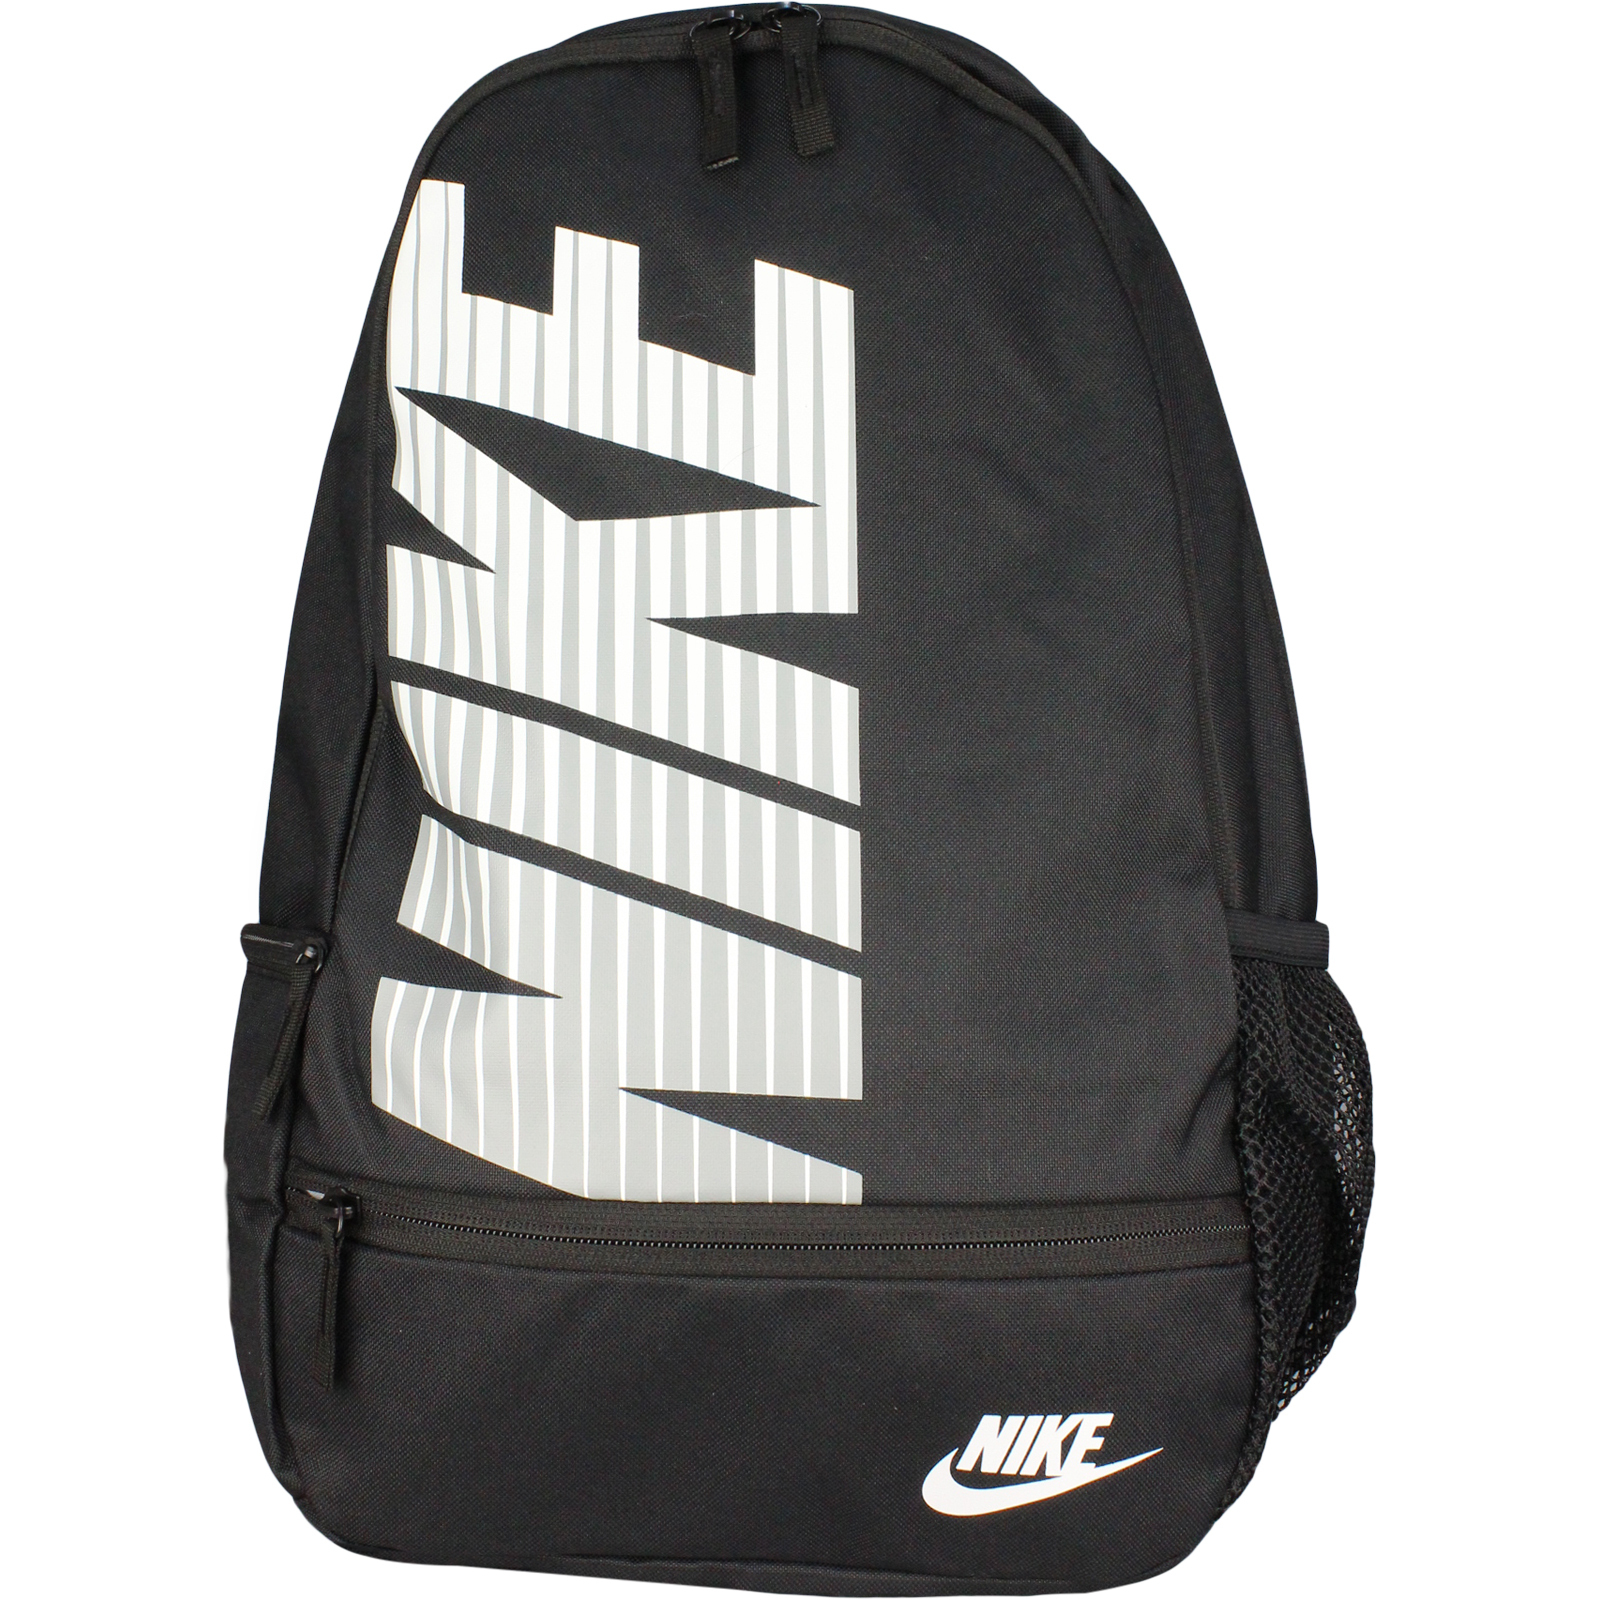 mustard warrant Constricted Rucsac unisex Nike Classic North BA4863-010